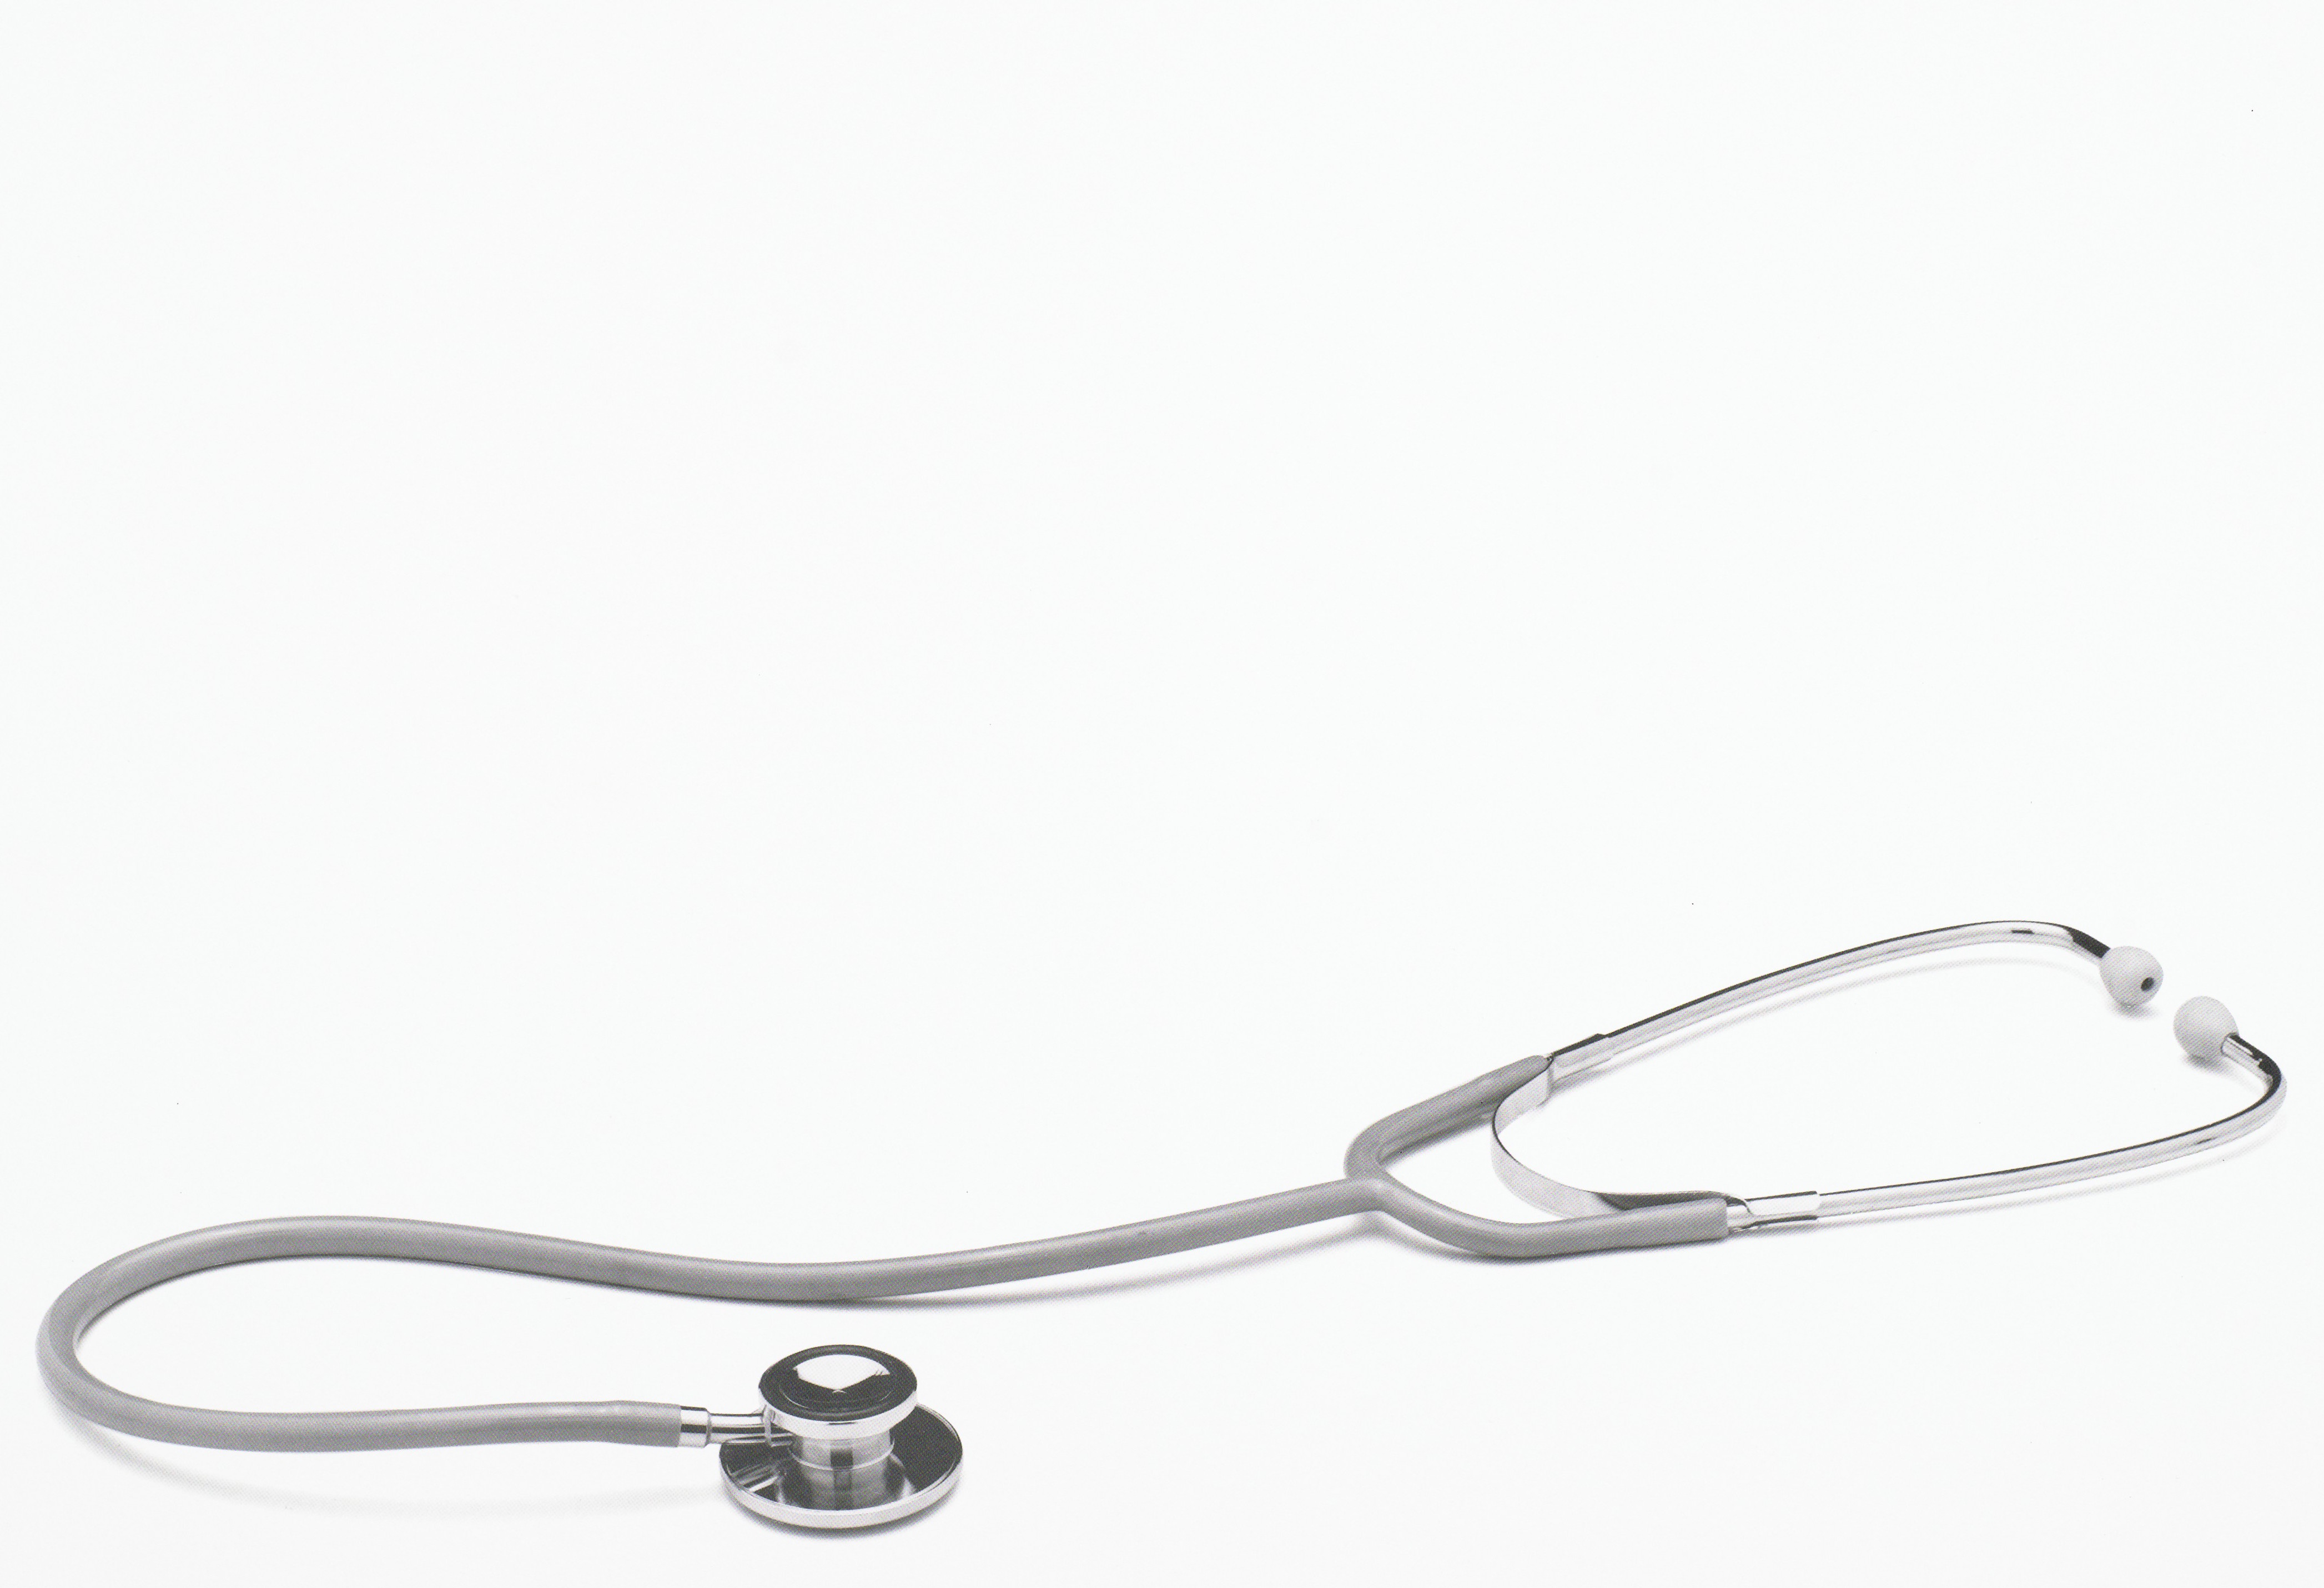 L0052260 A stethoscope representing an advertisement for safe sex